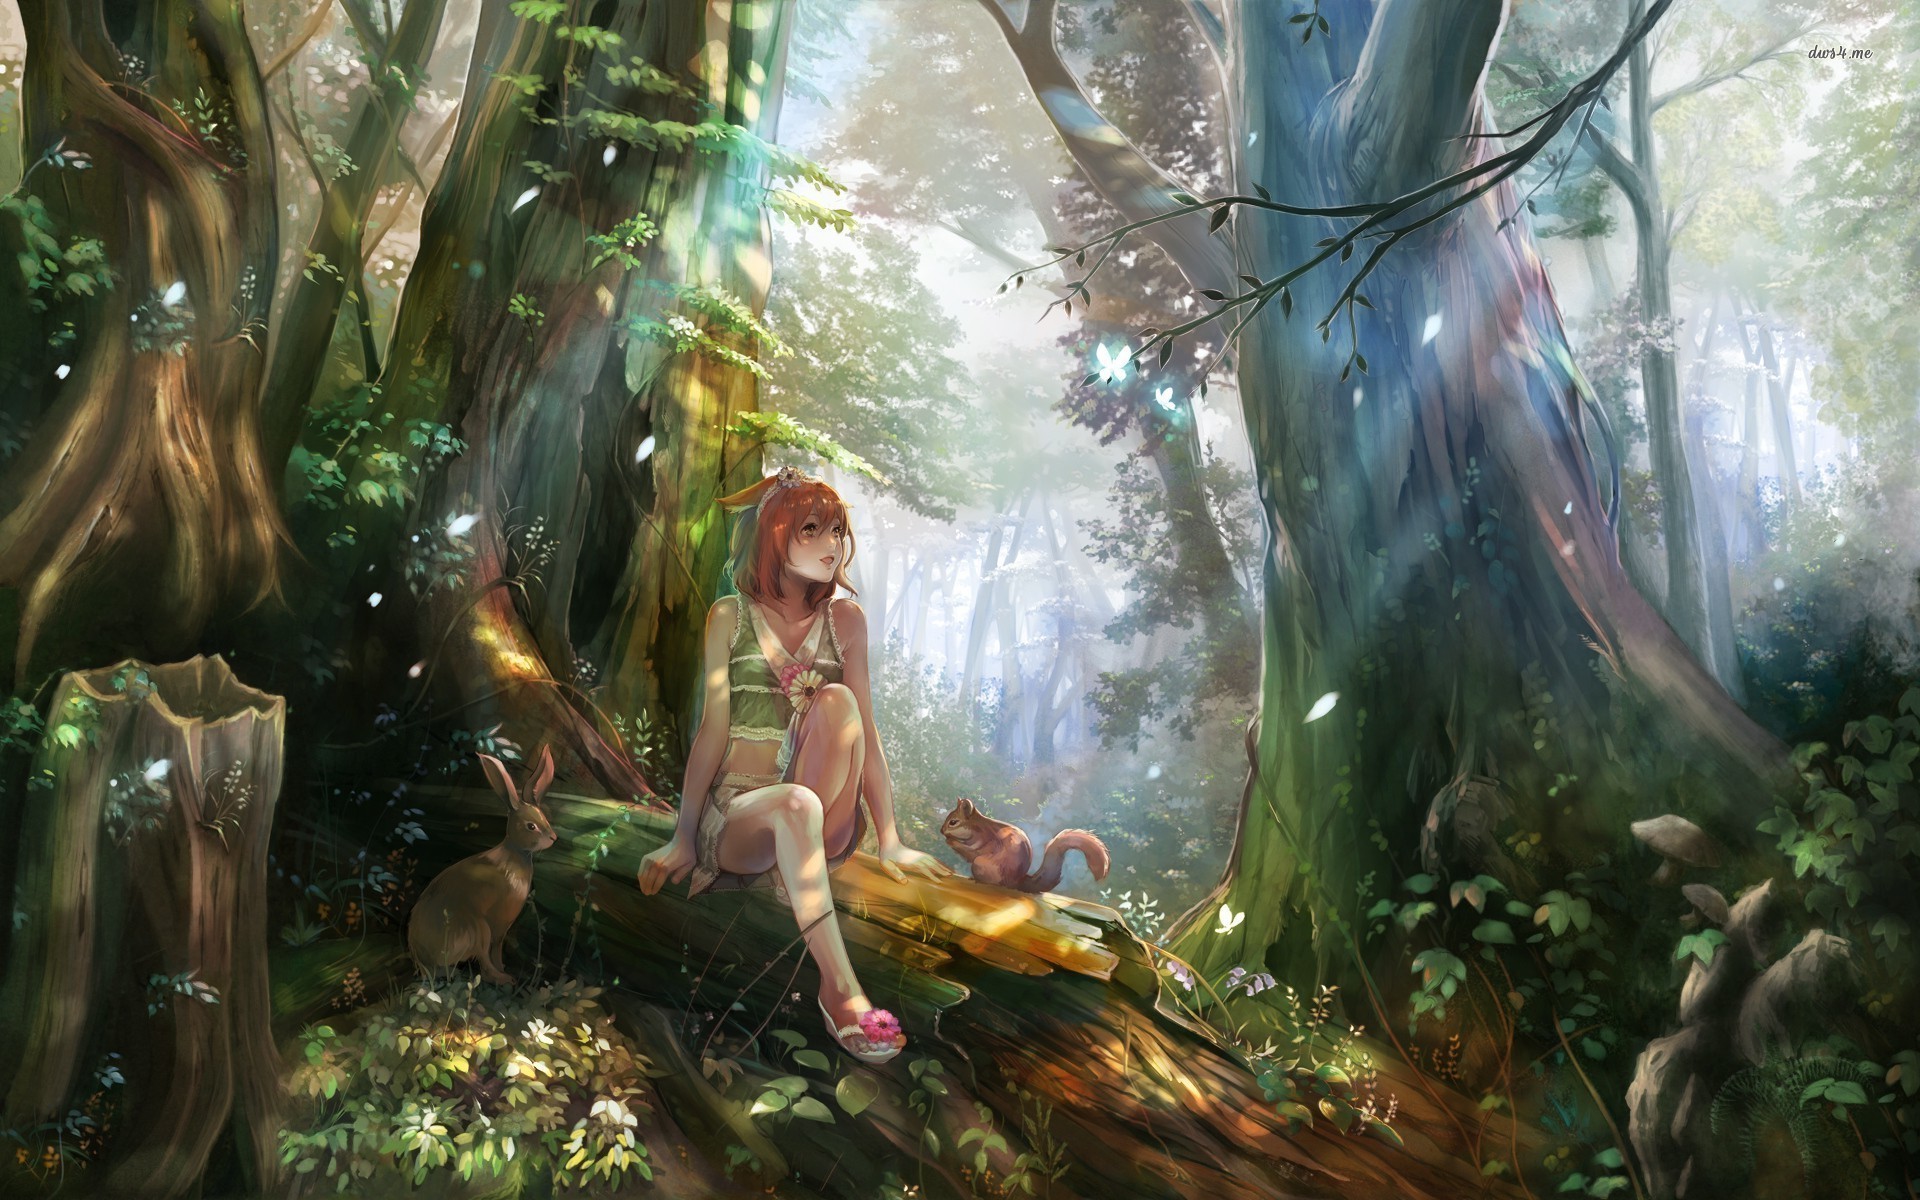 Girl in the magical forest wallpaper - Anime wallpapers - #15970